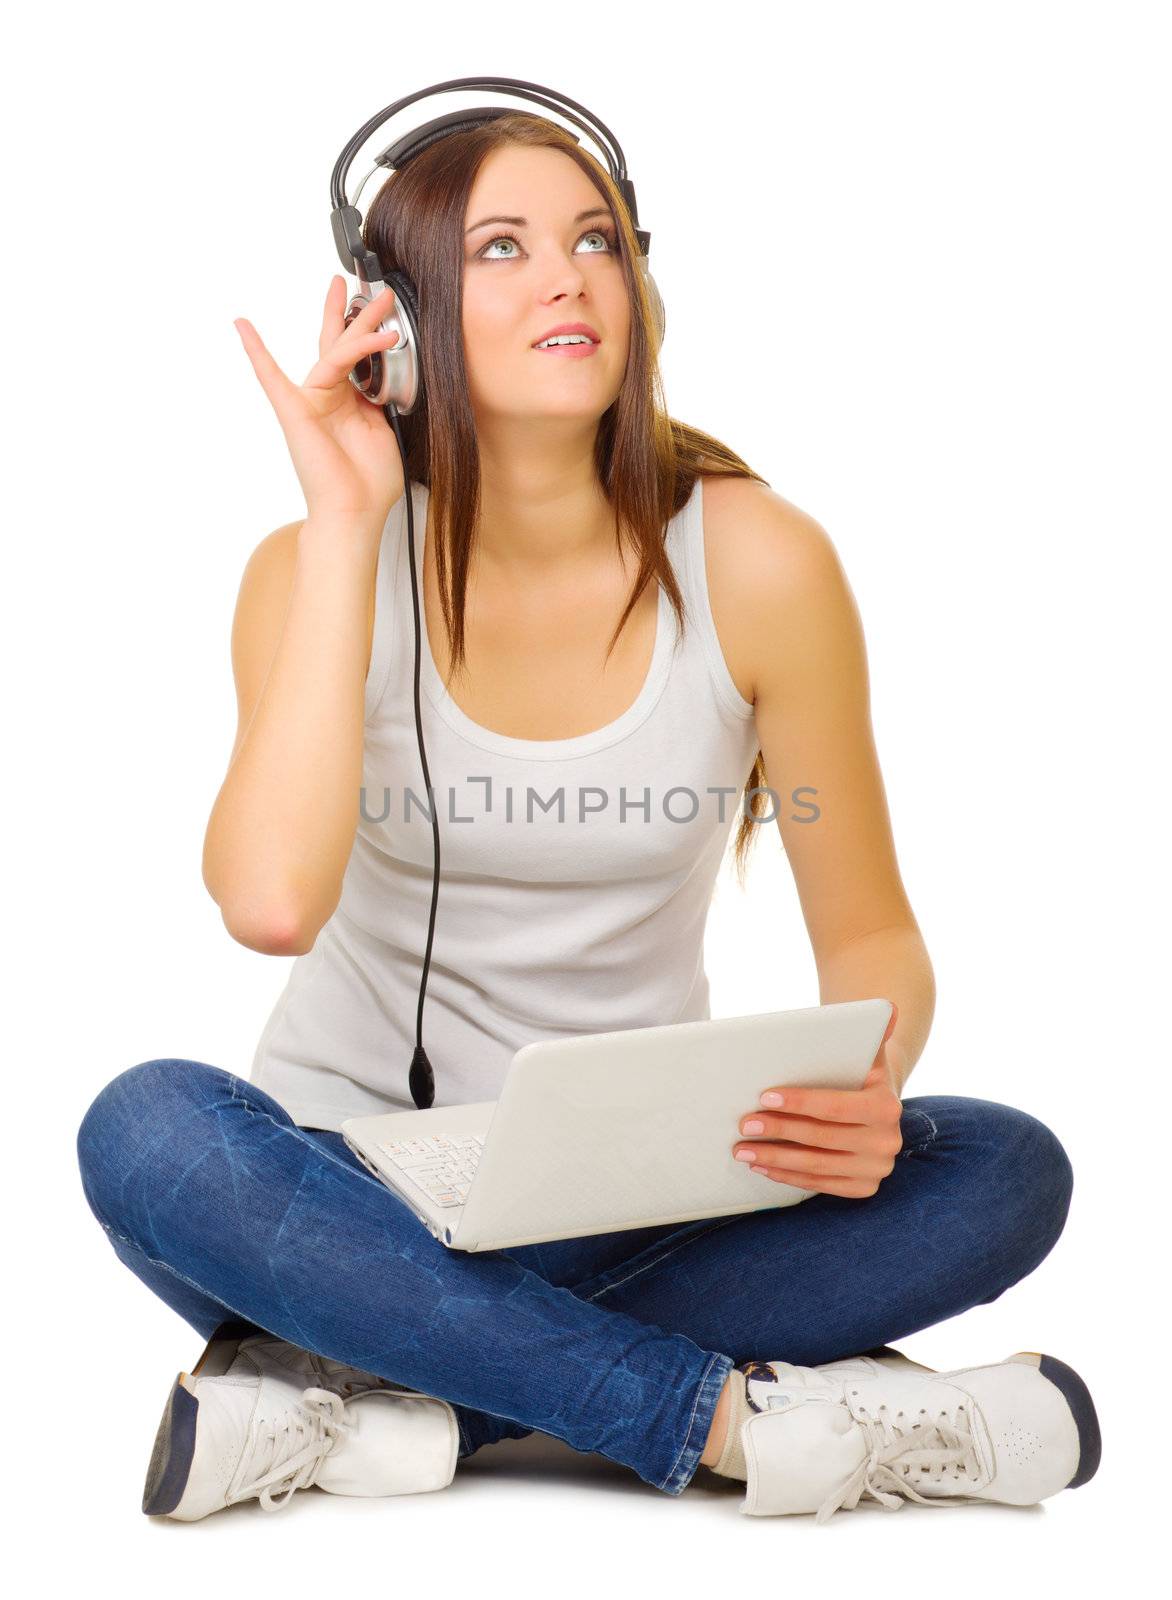 Young girl listen music isolated